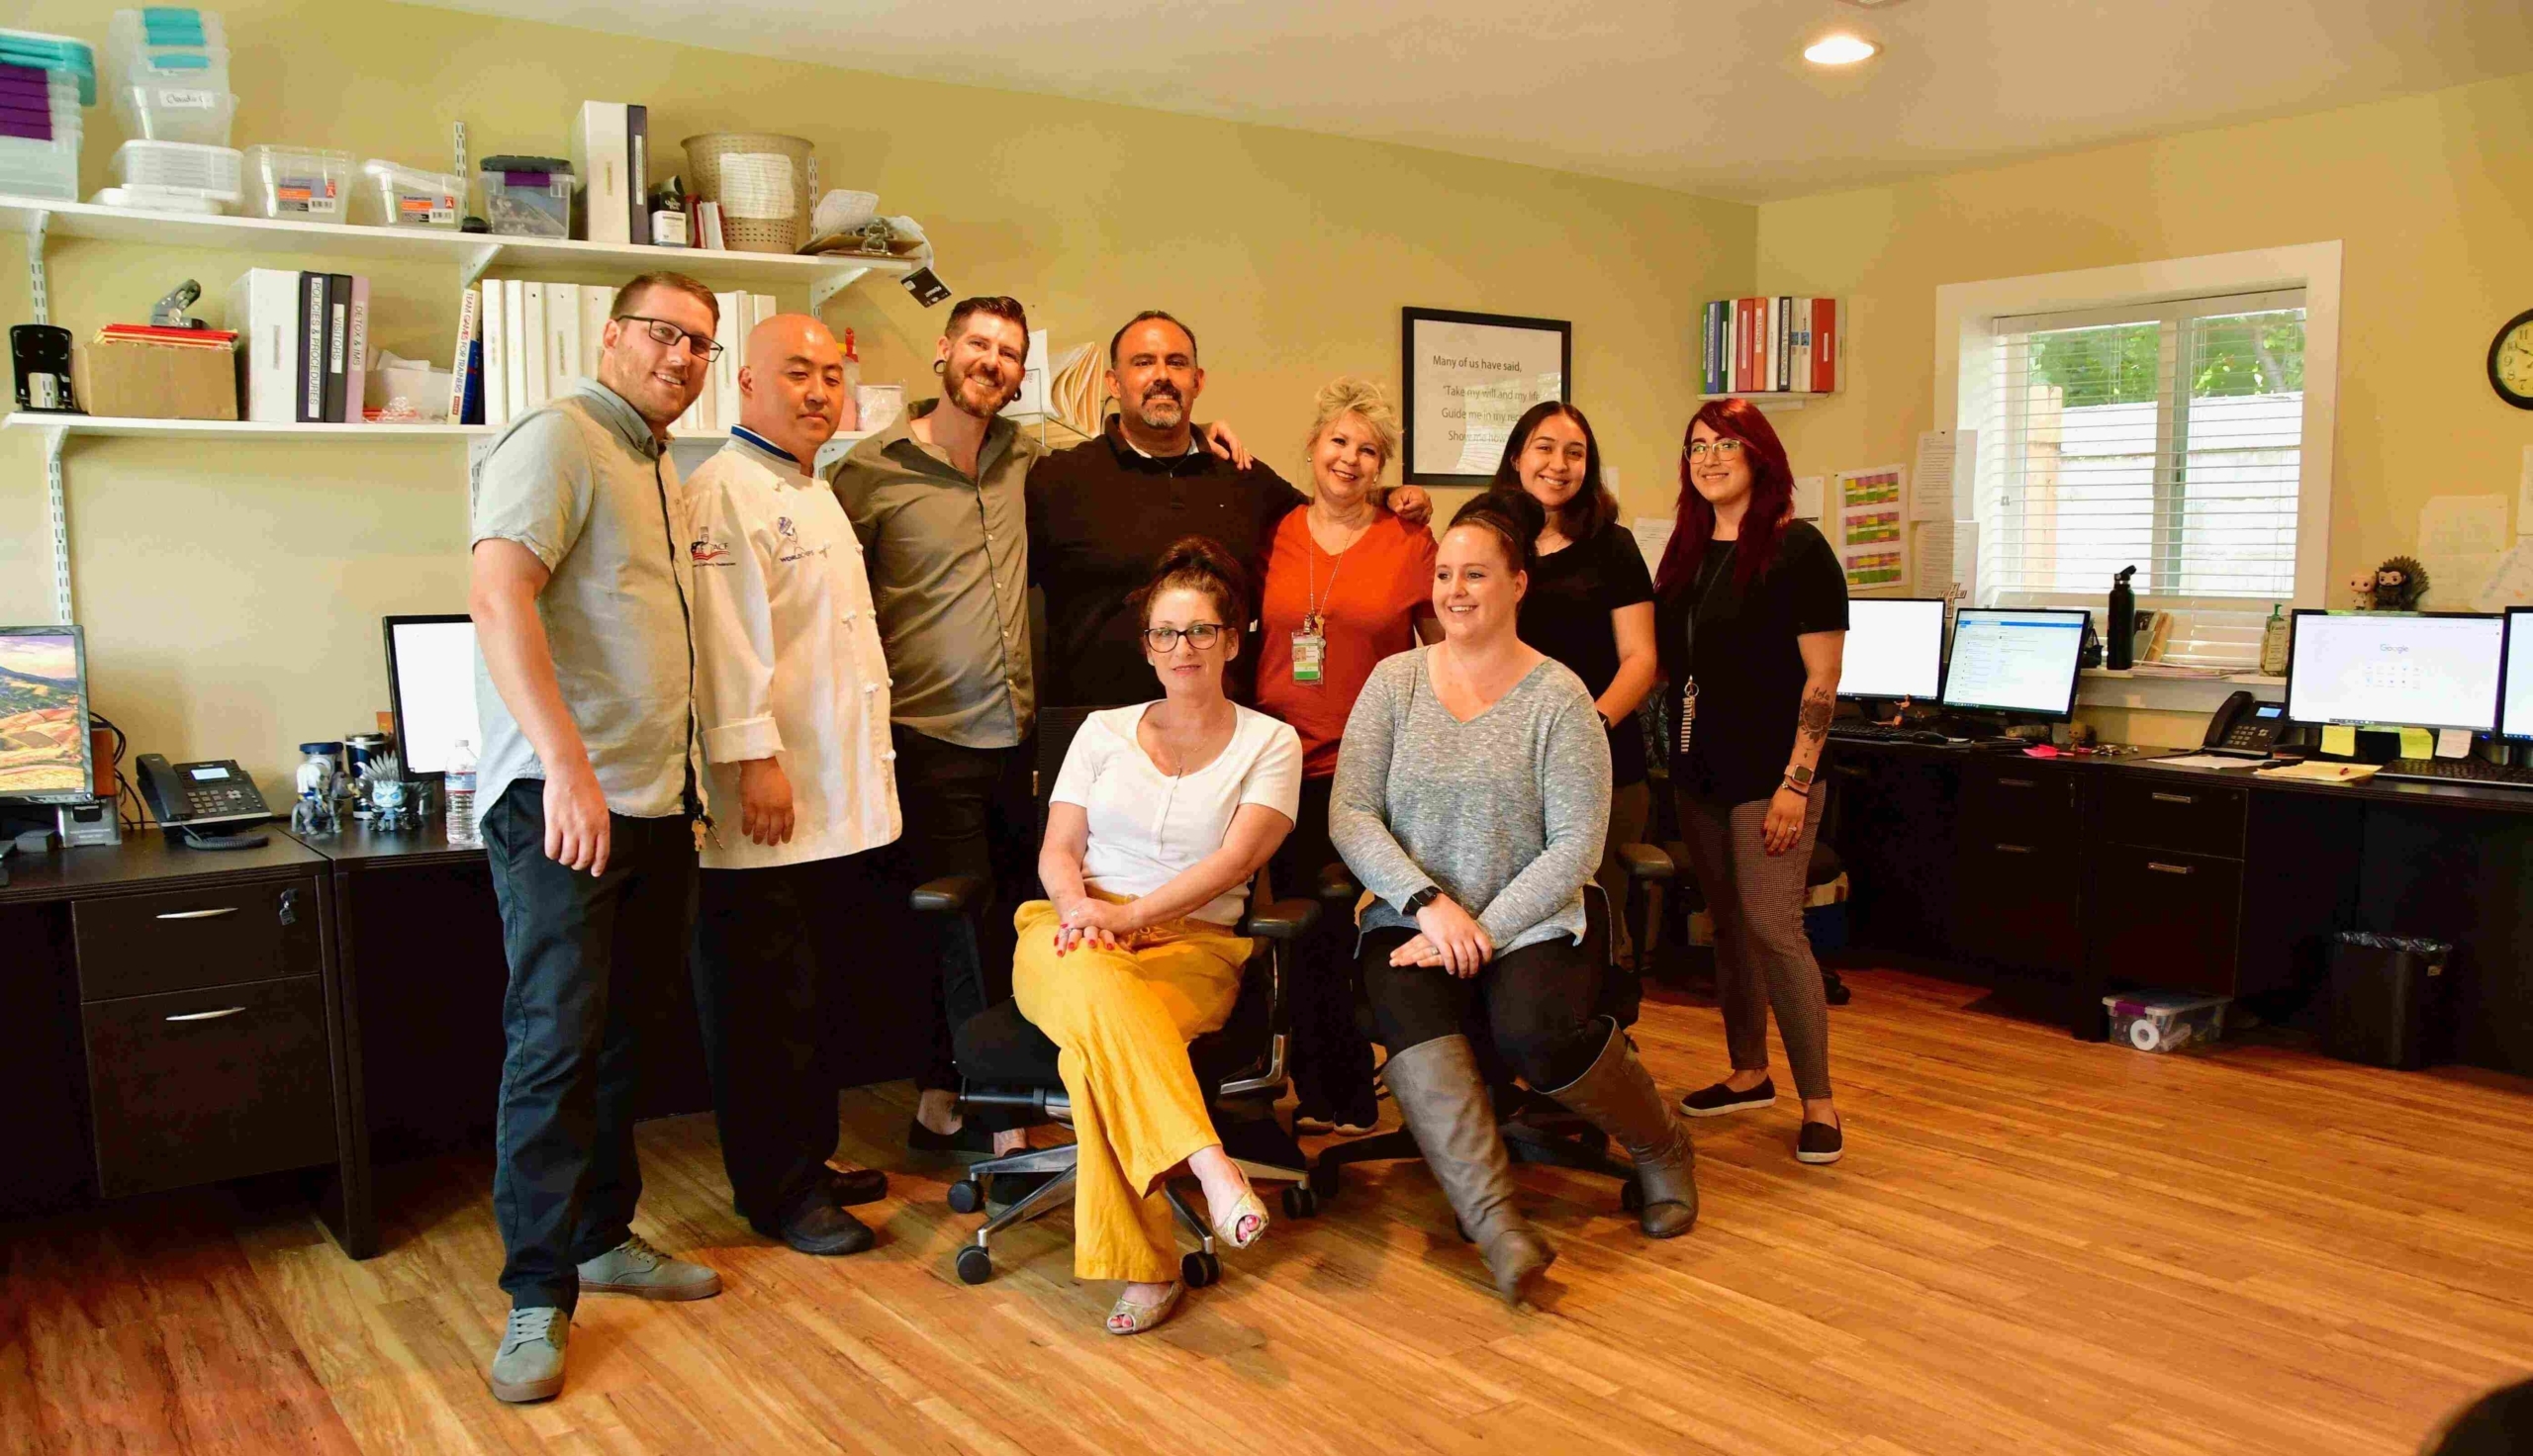 The team at DivineDetox.com poses for a pic at their premier addiction treatment facility